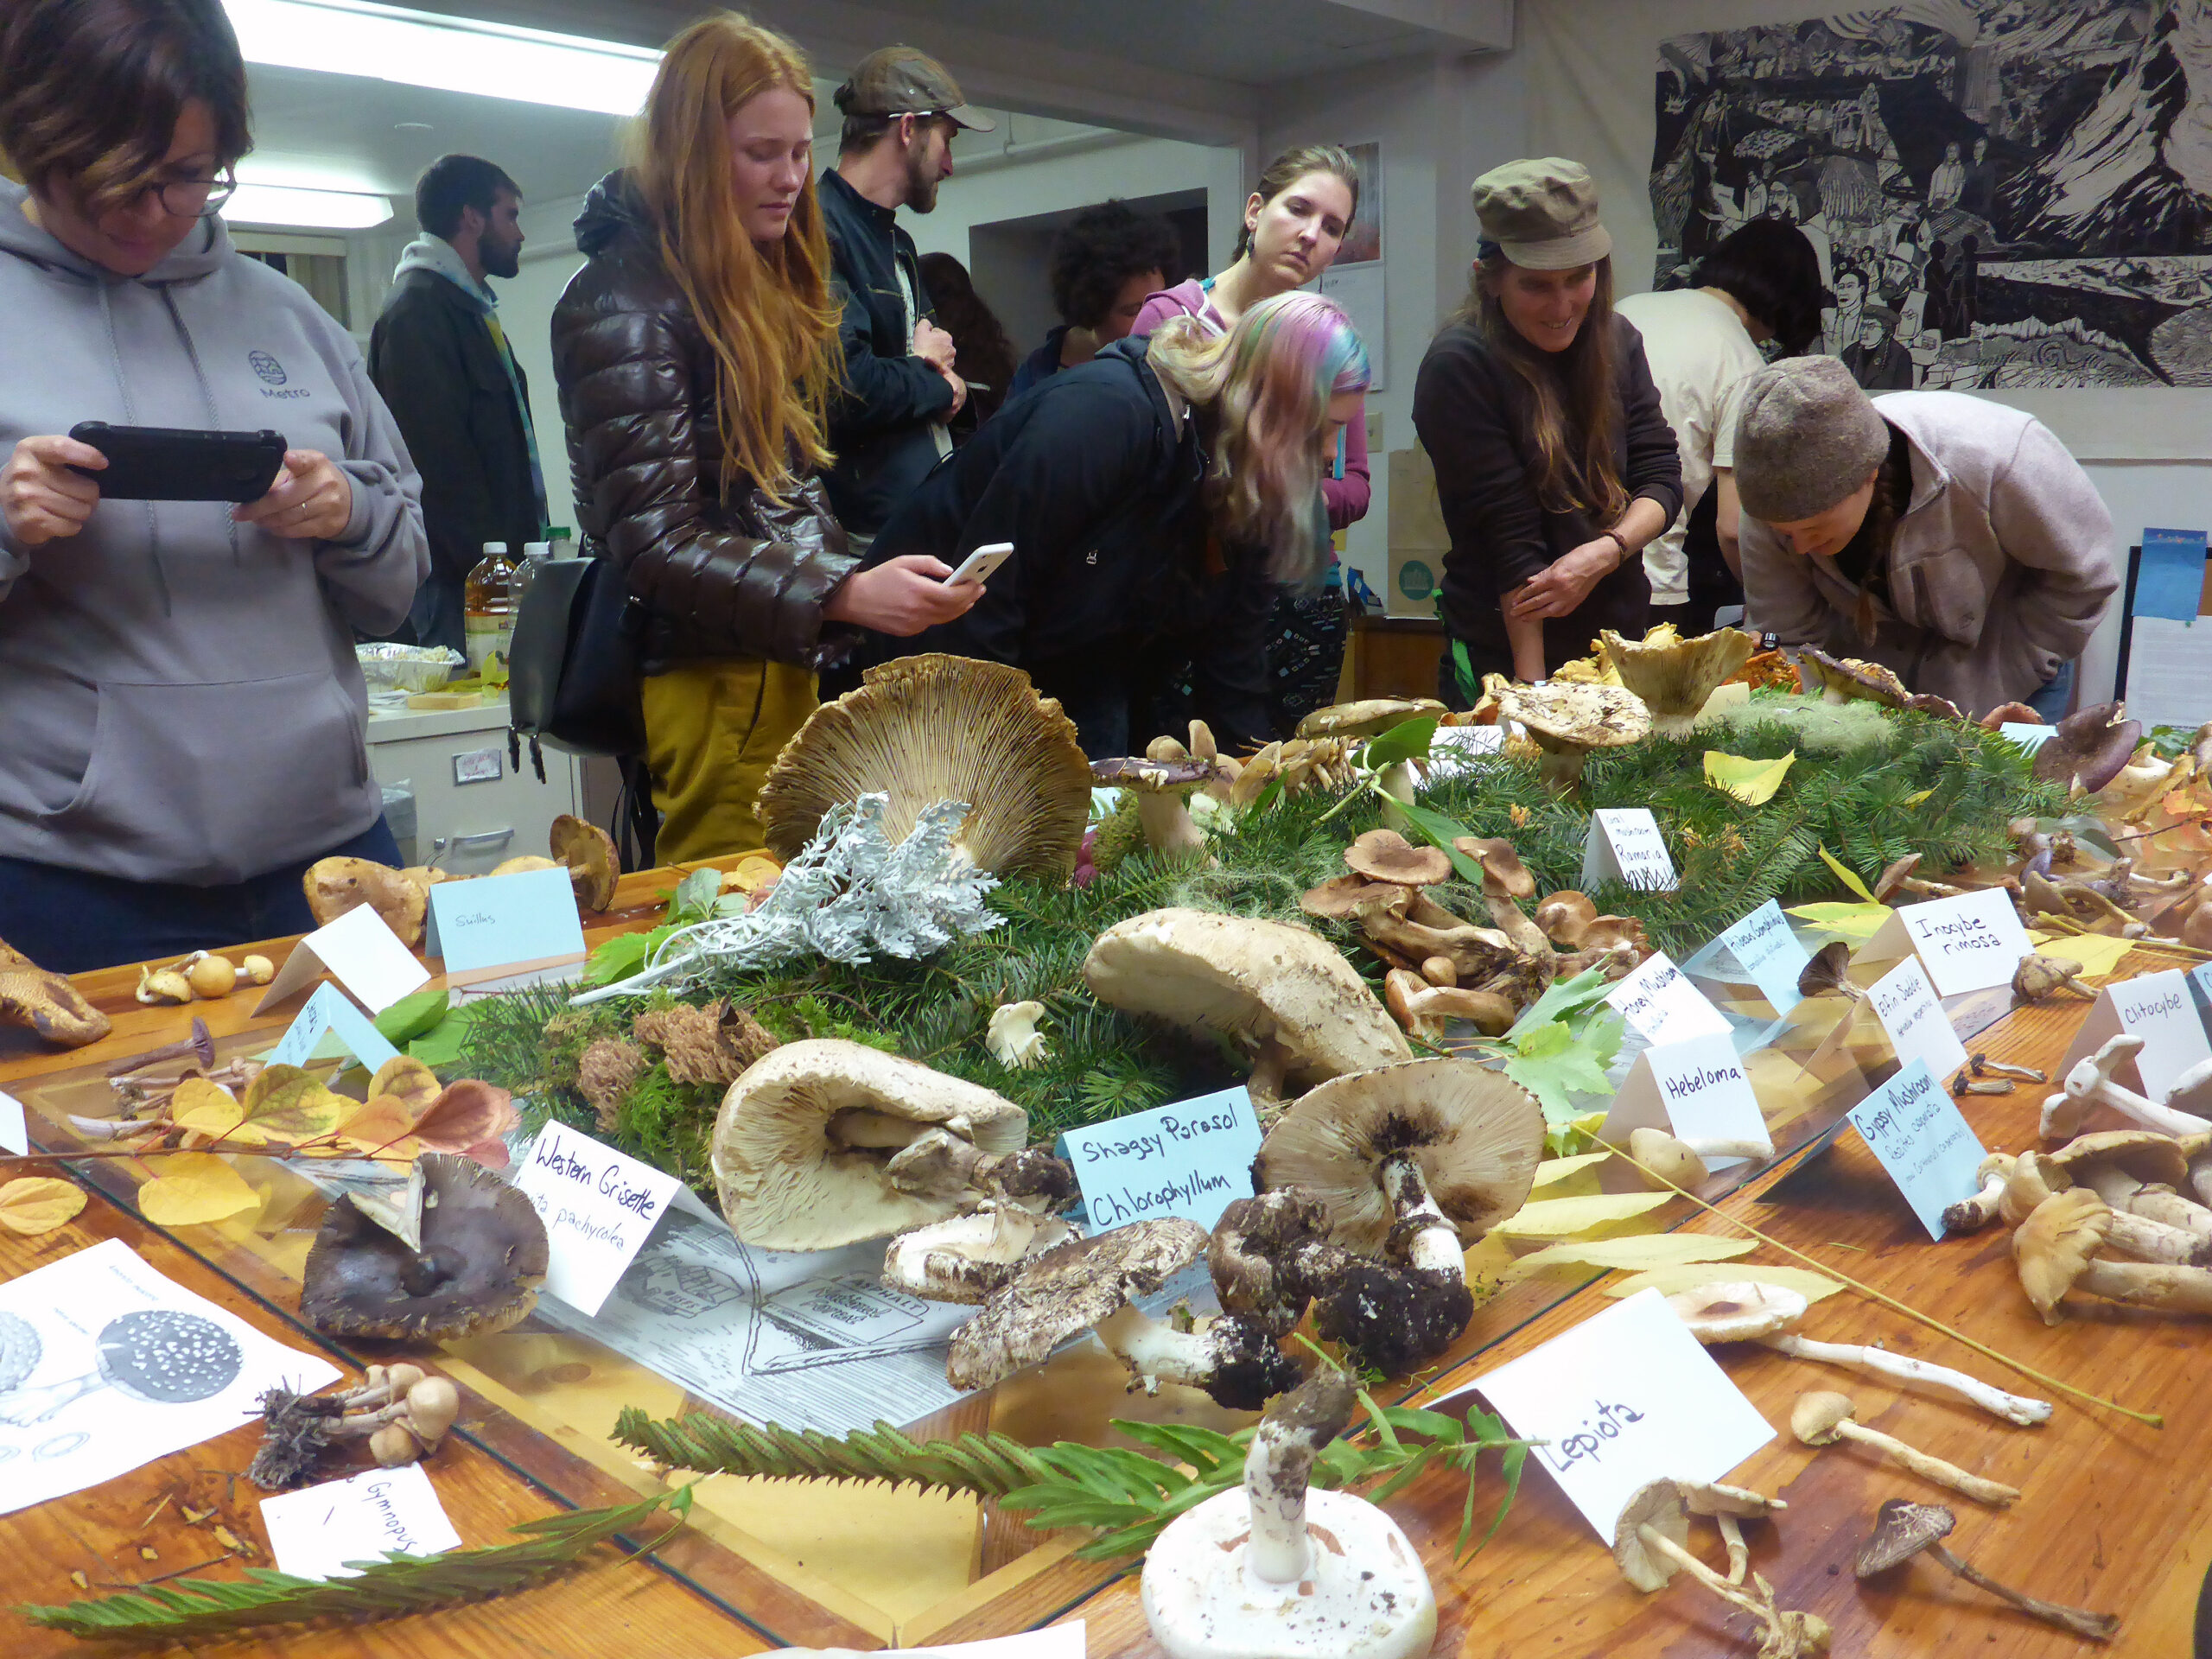 Color photo of a group of people exclaiming over a mushroom display on a long wooden table. Various samples and name cards are arranged. Many folks are taking pictures with their cellphones.